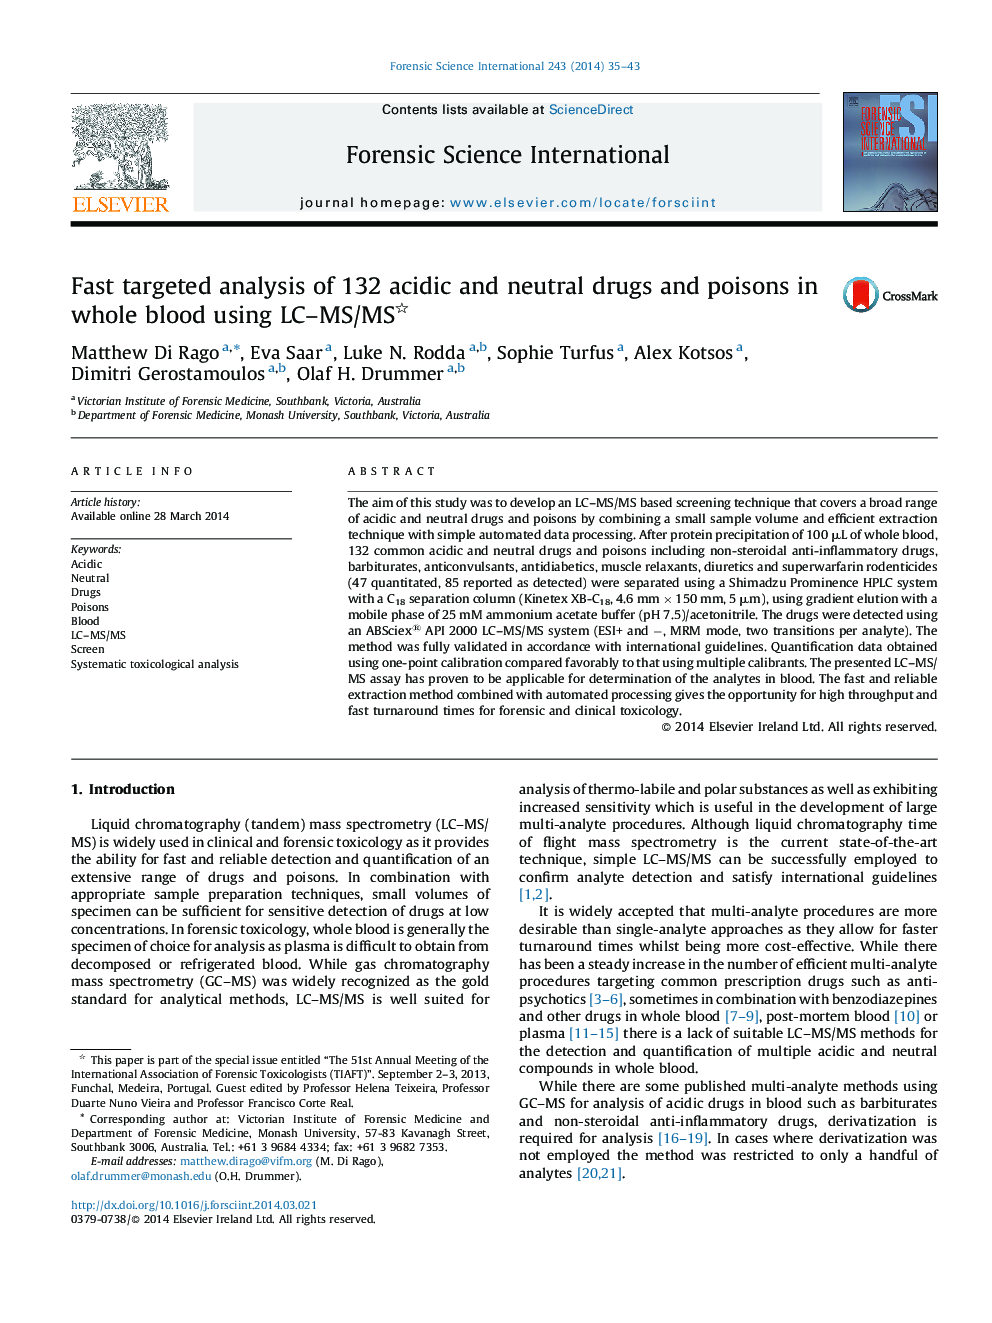 Fast targeted analysis of 132 acidic and neutral drugs and poisons in whole blood using LC–MS/MS 